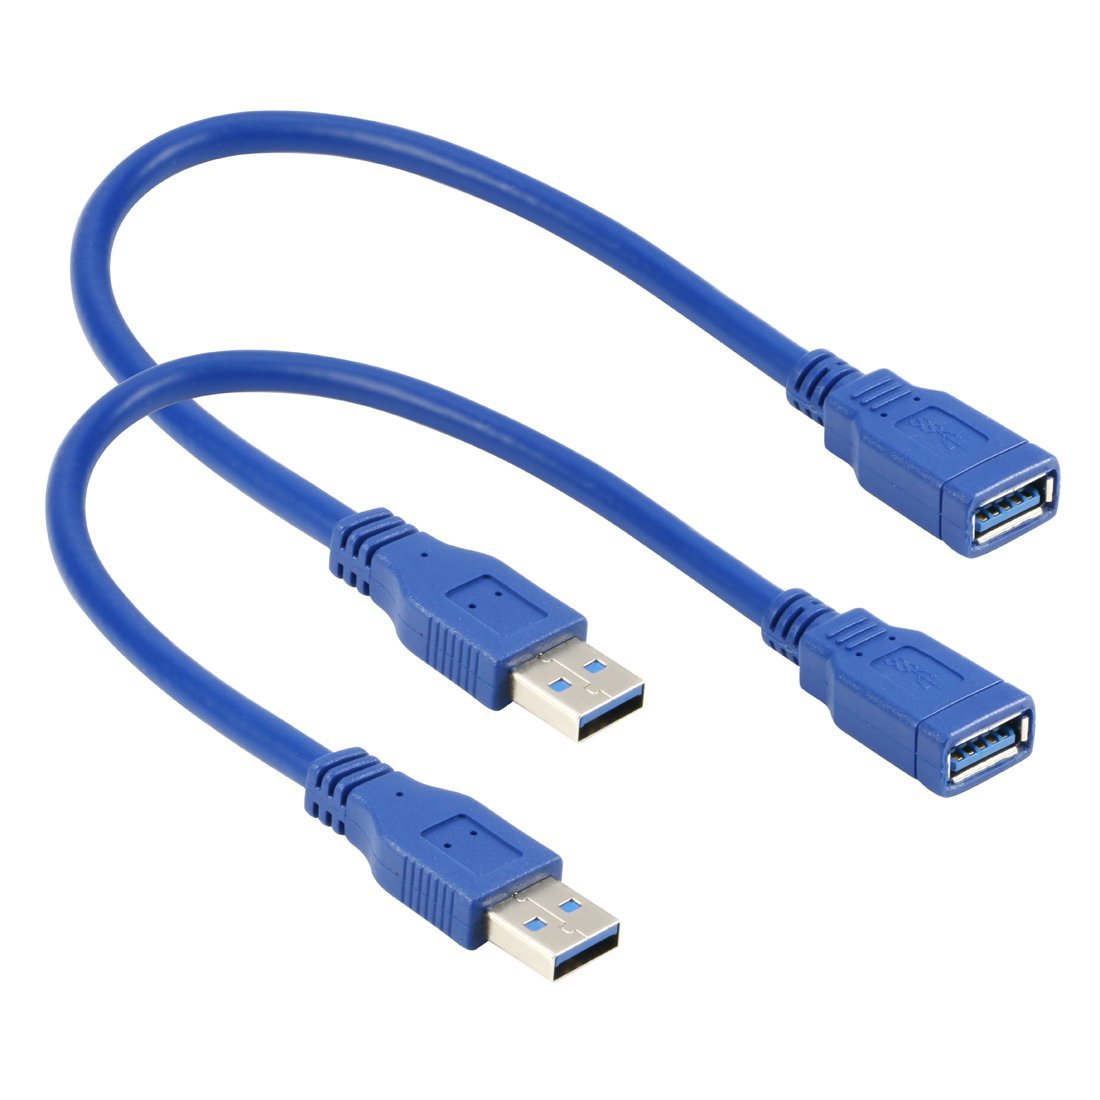 Book Cover RIITOP Short USB 3.0 Extension Cable Type A Male to Female Blue 1 Foot (2-Pack)